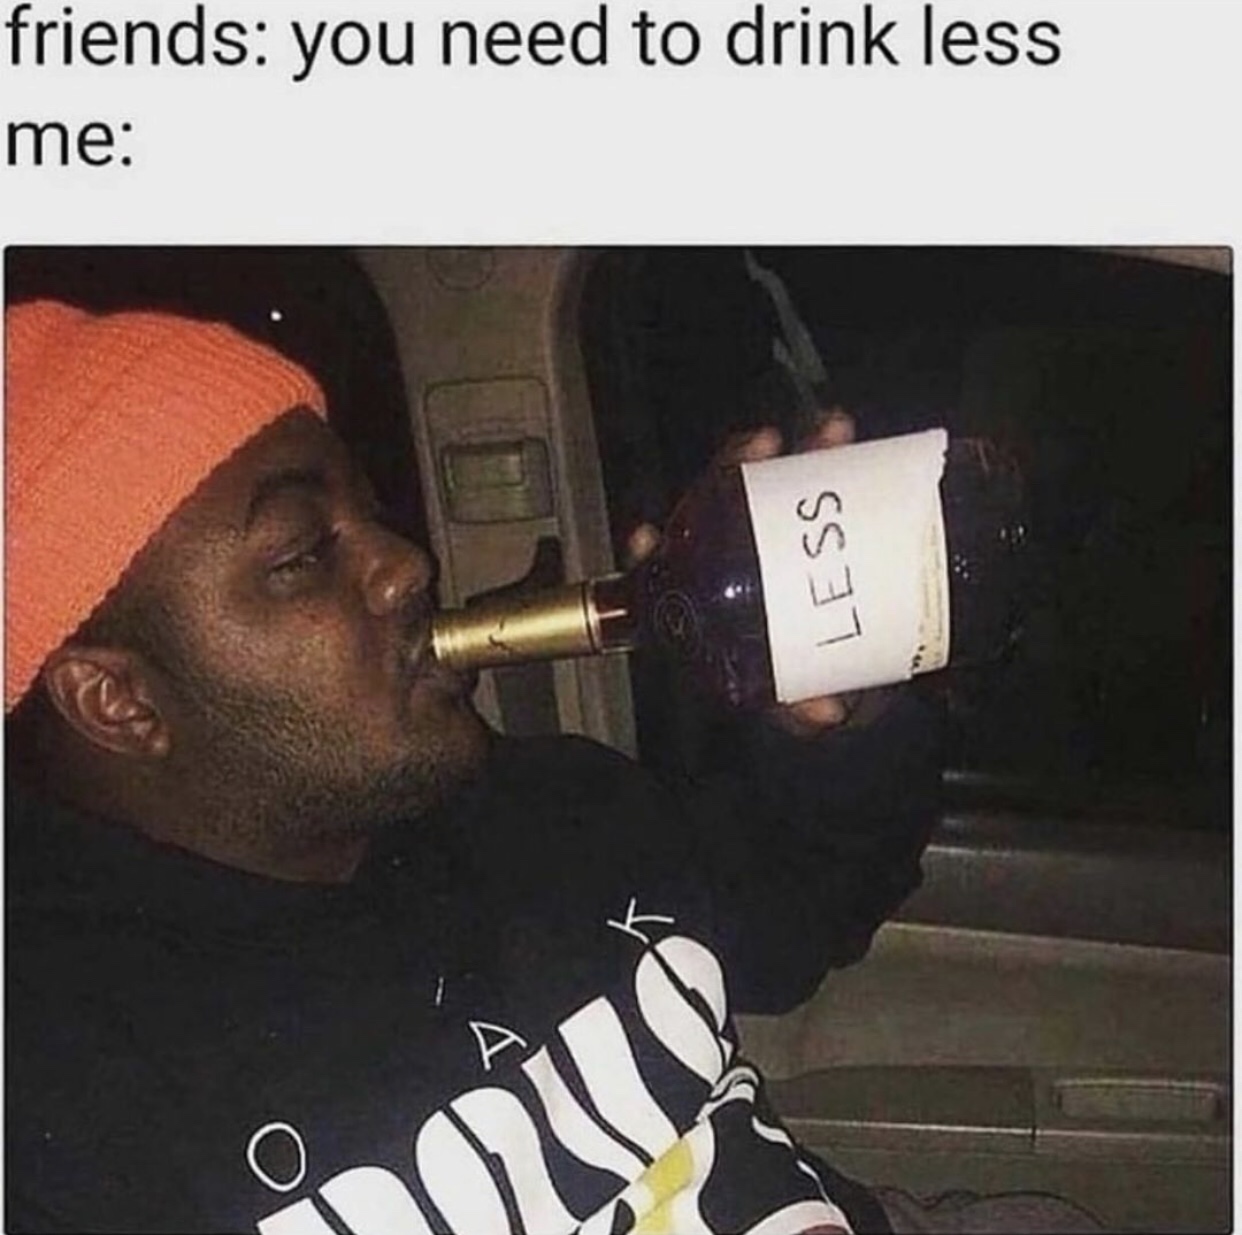 new drinking memes - friends you need to drink less me Less